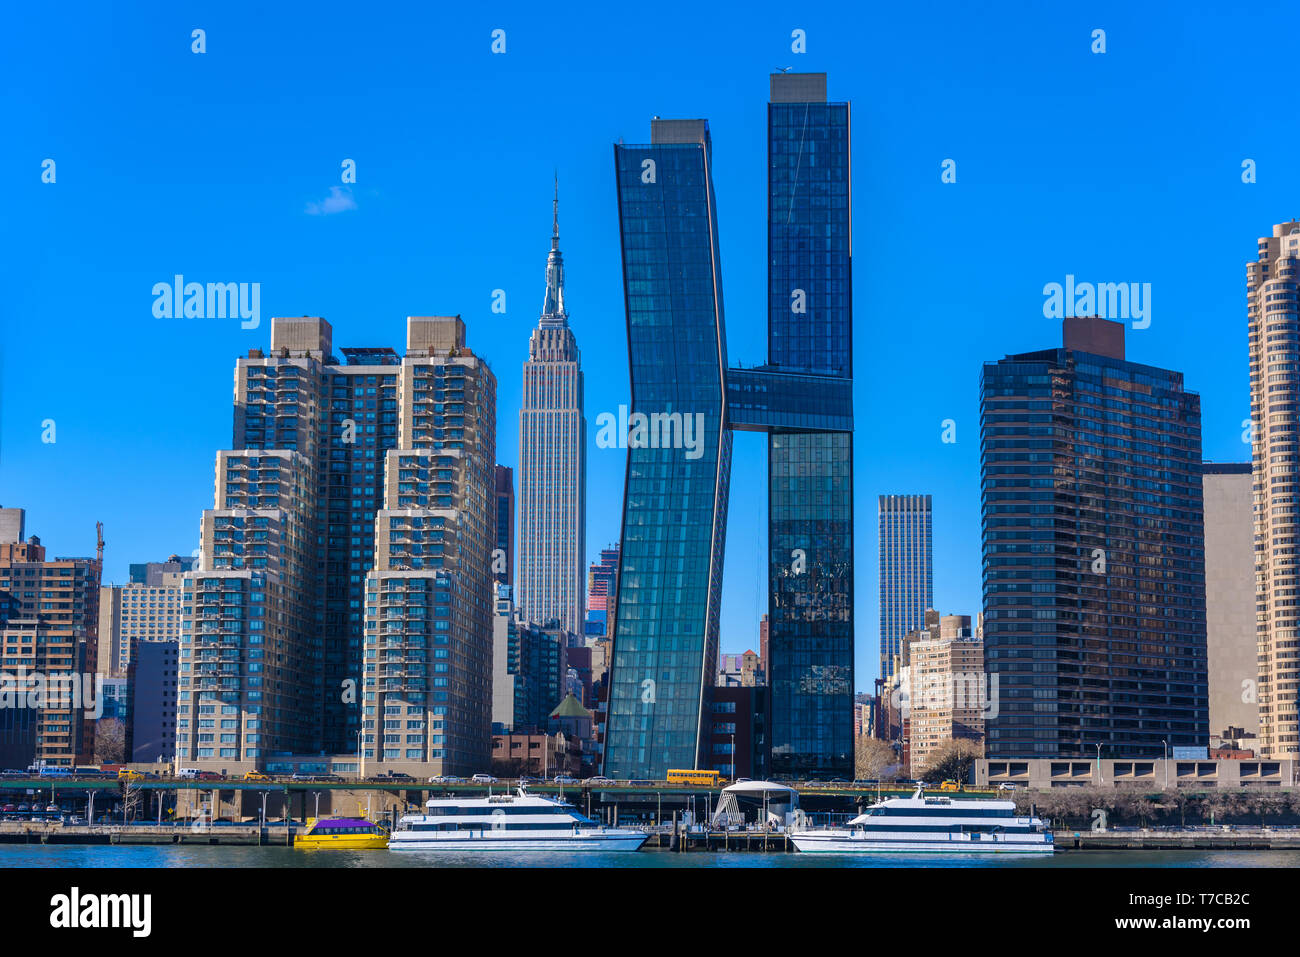 View from East Side River to Empire State Building - Manhatten Skyline of New York, USA Stock Photo